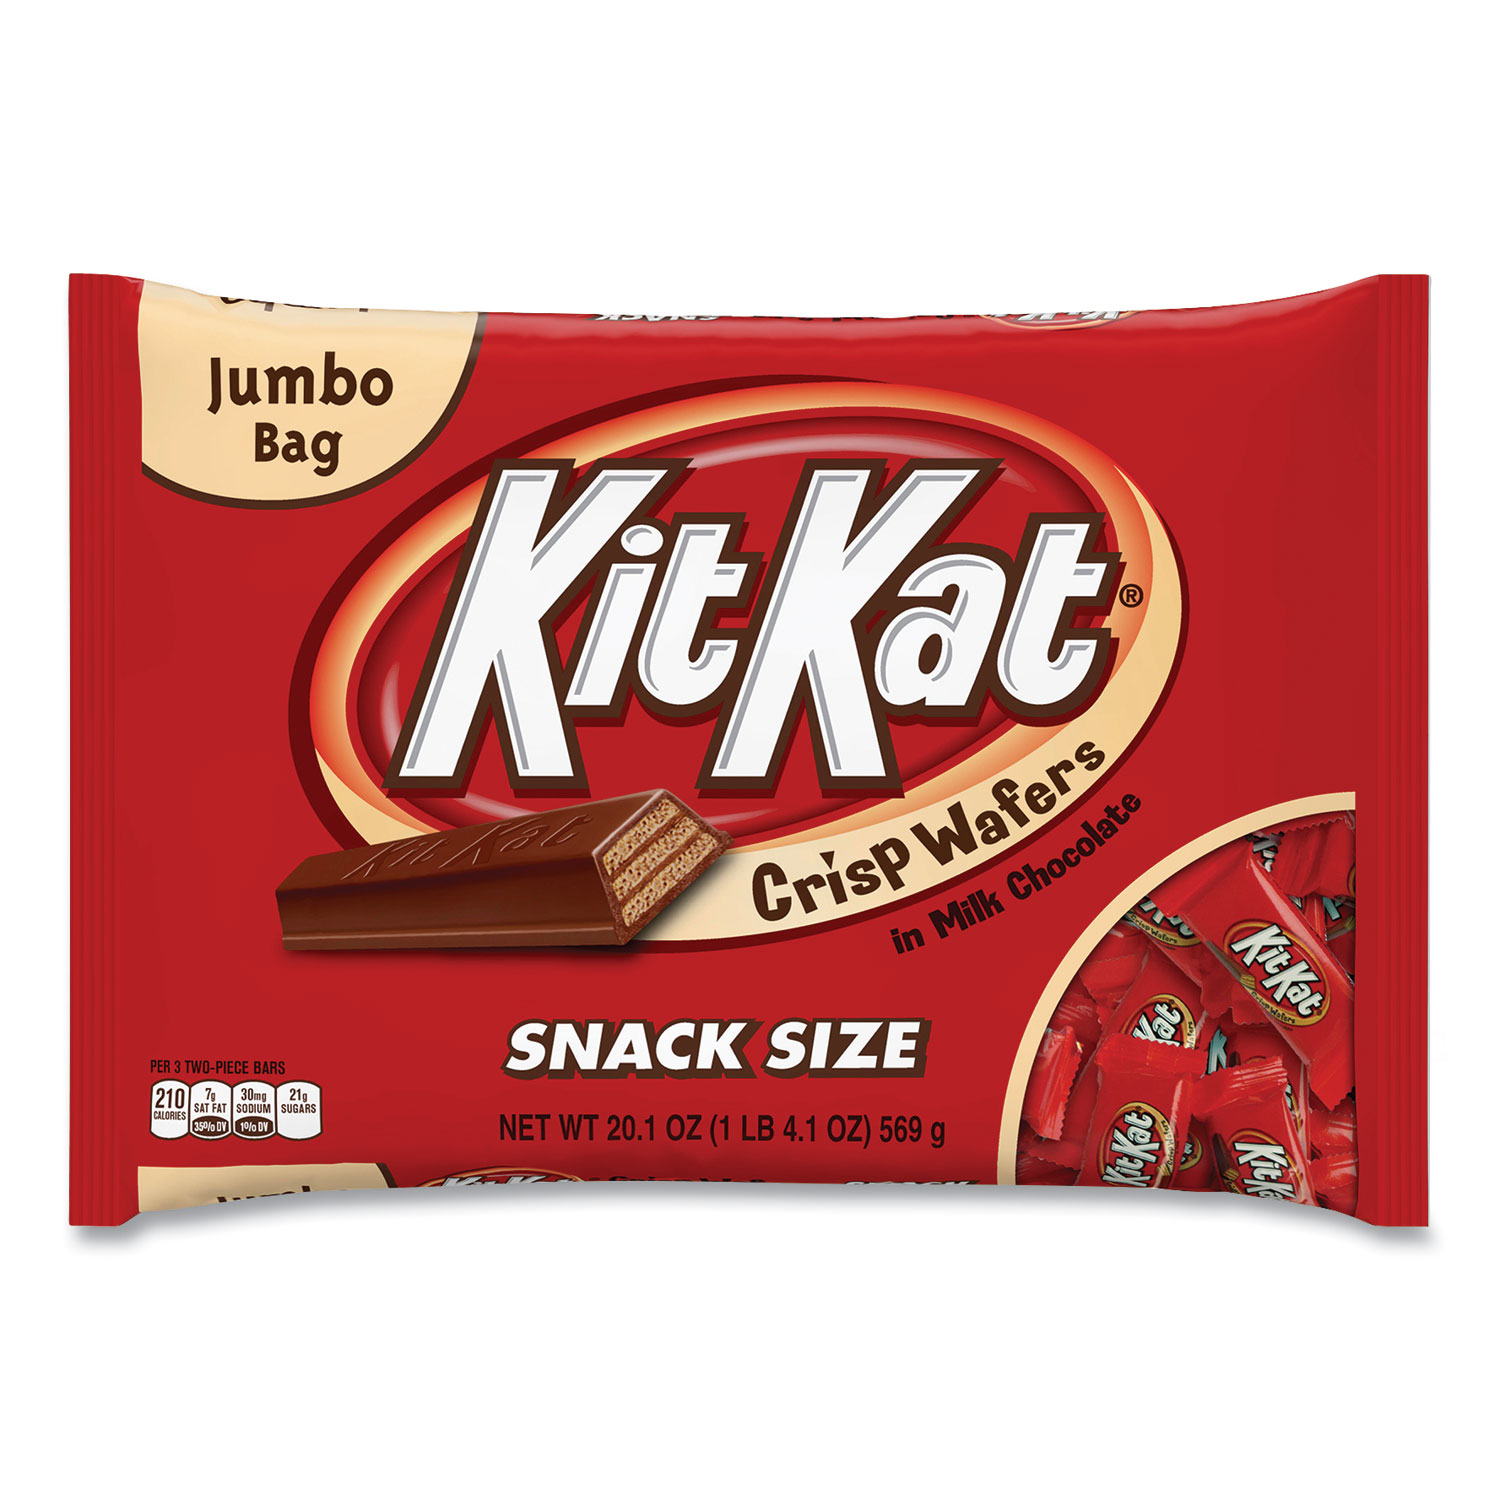  Kit Kat 7668 Snack Size, Crisp Wafers in Milk Chocolate, 20.1 oz Bag, Free Delivery in 1-4 Business Days (GRR24600011) 